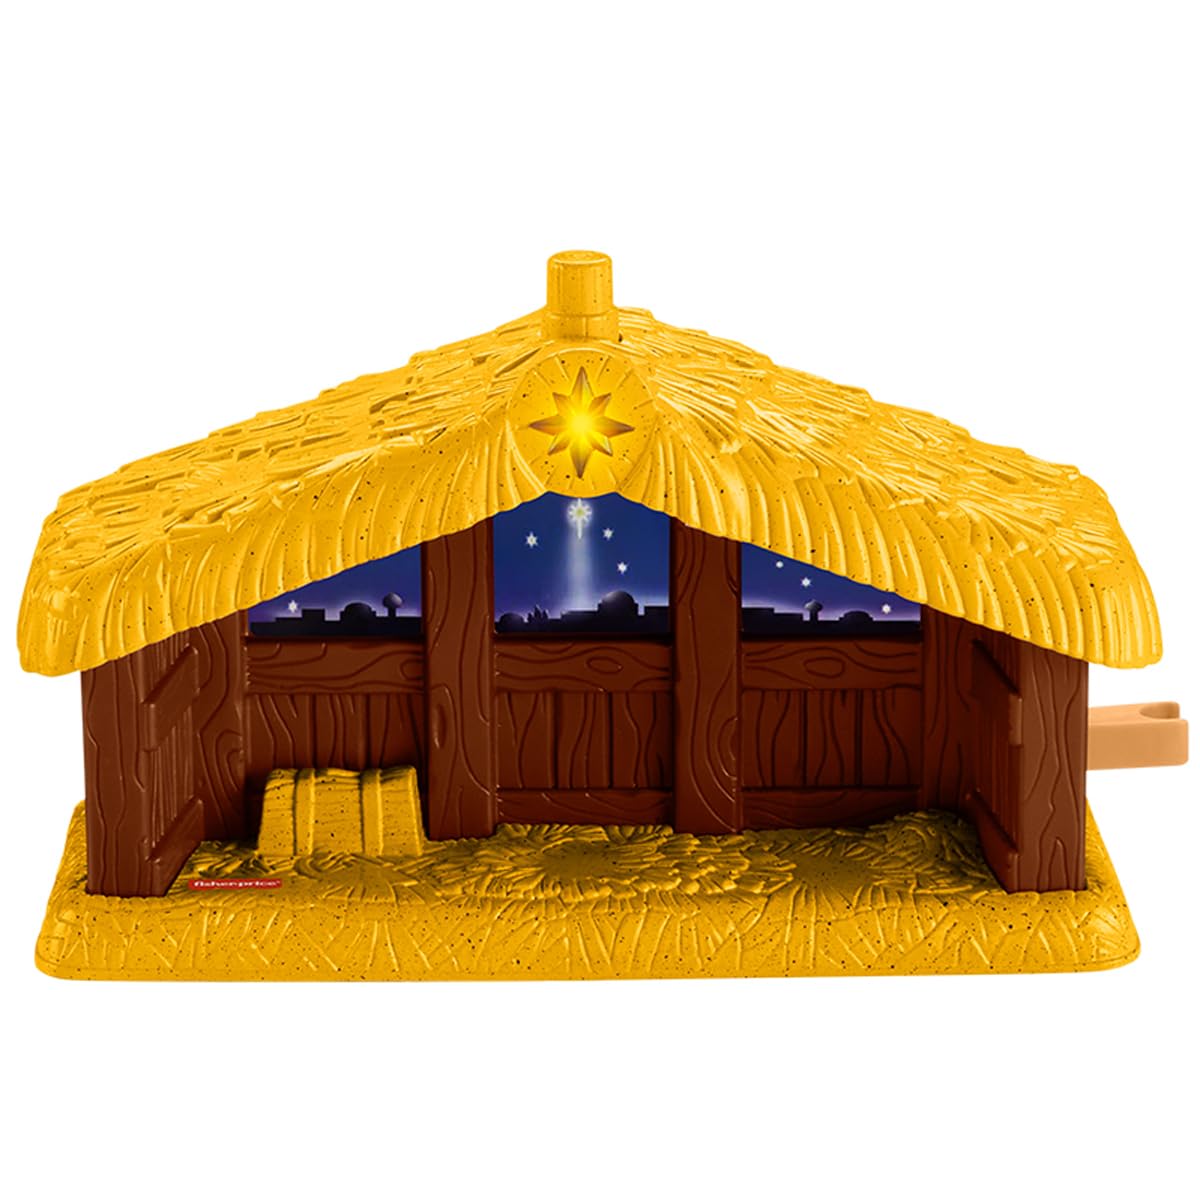 Replacement Part for Fisher-Price Little People Nativity Set - HMX70 ~ Manger/Stable ~ Plays Music When Pressed and Star Lights Up ~ Works Well with Other Little People Sets Too!